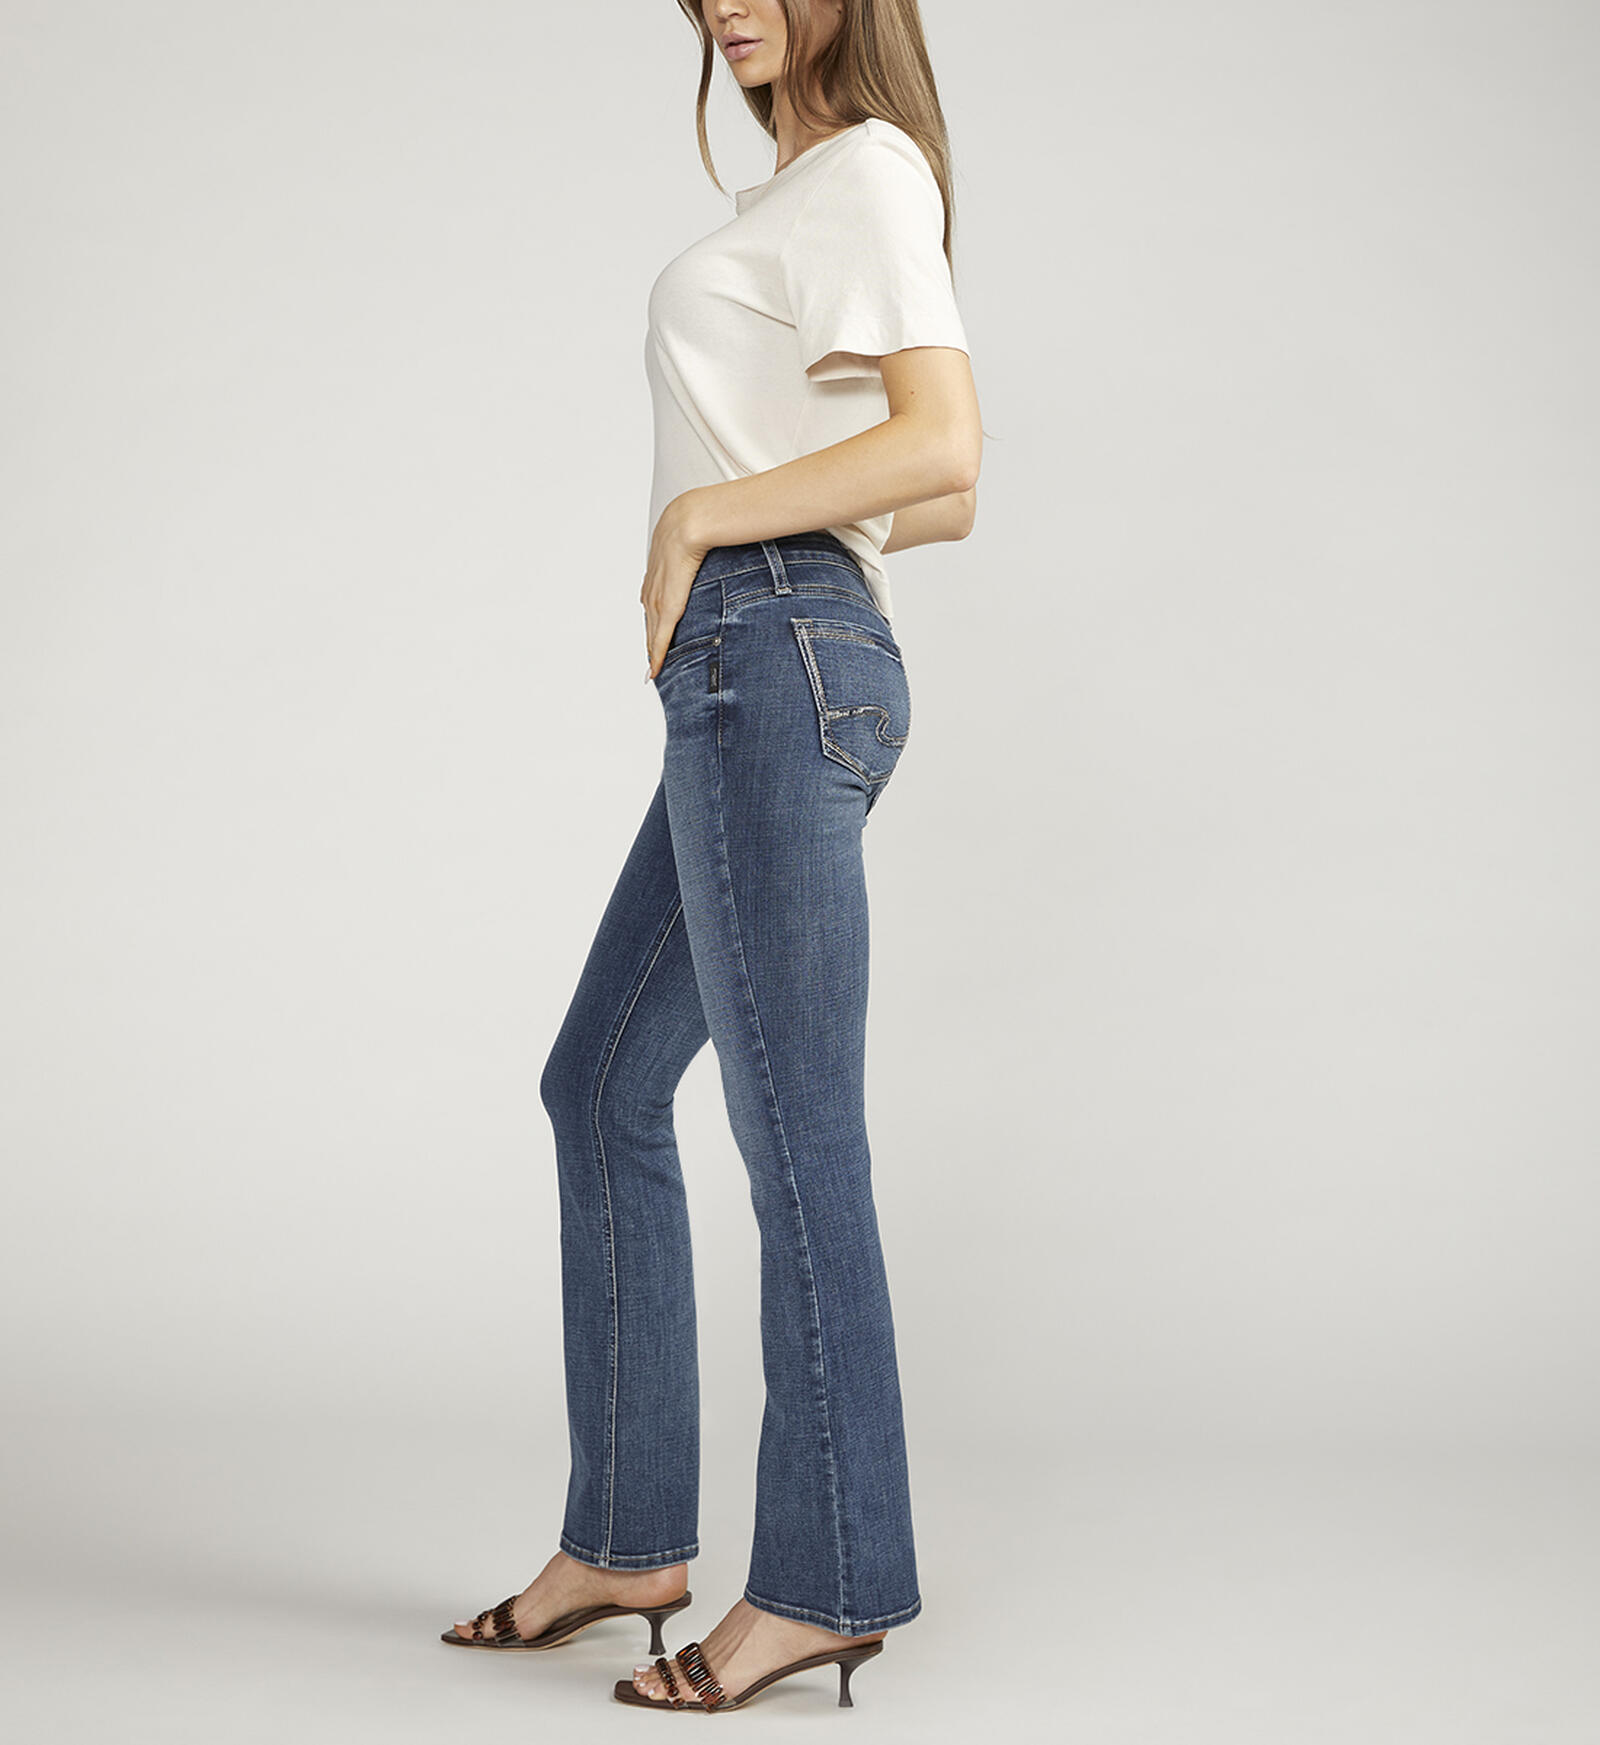 Buy Tuesday Low Rise Slim Bootcut Jeans for USD 88.00